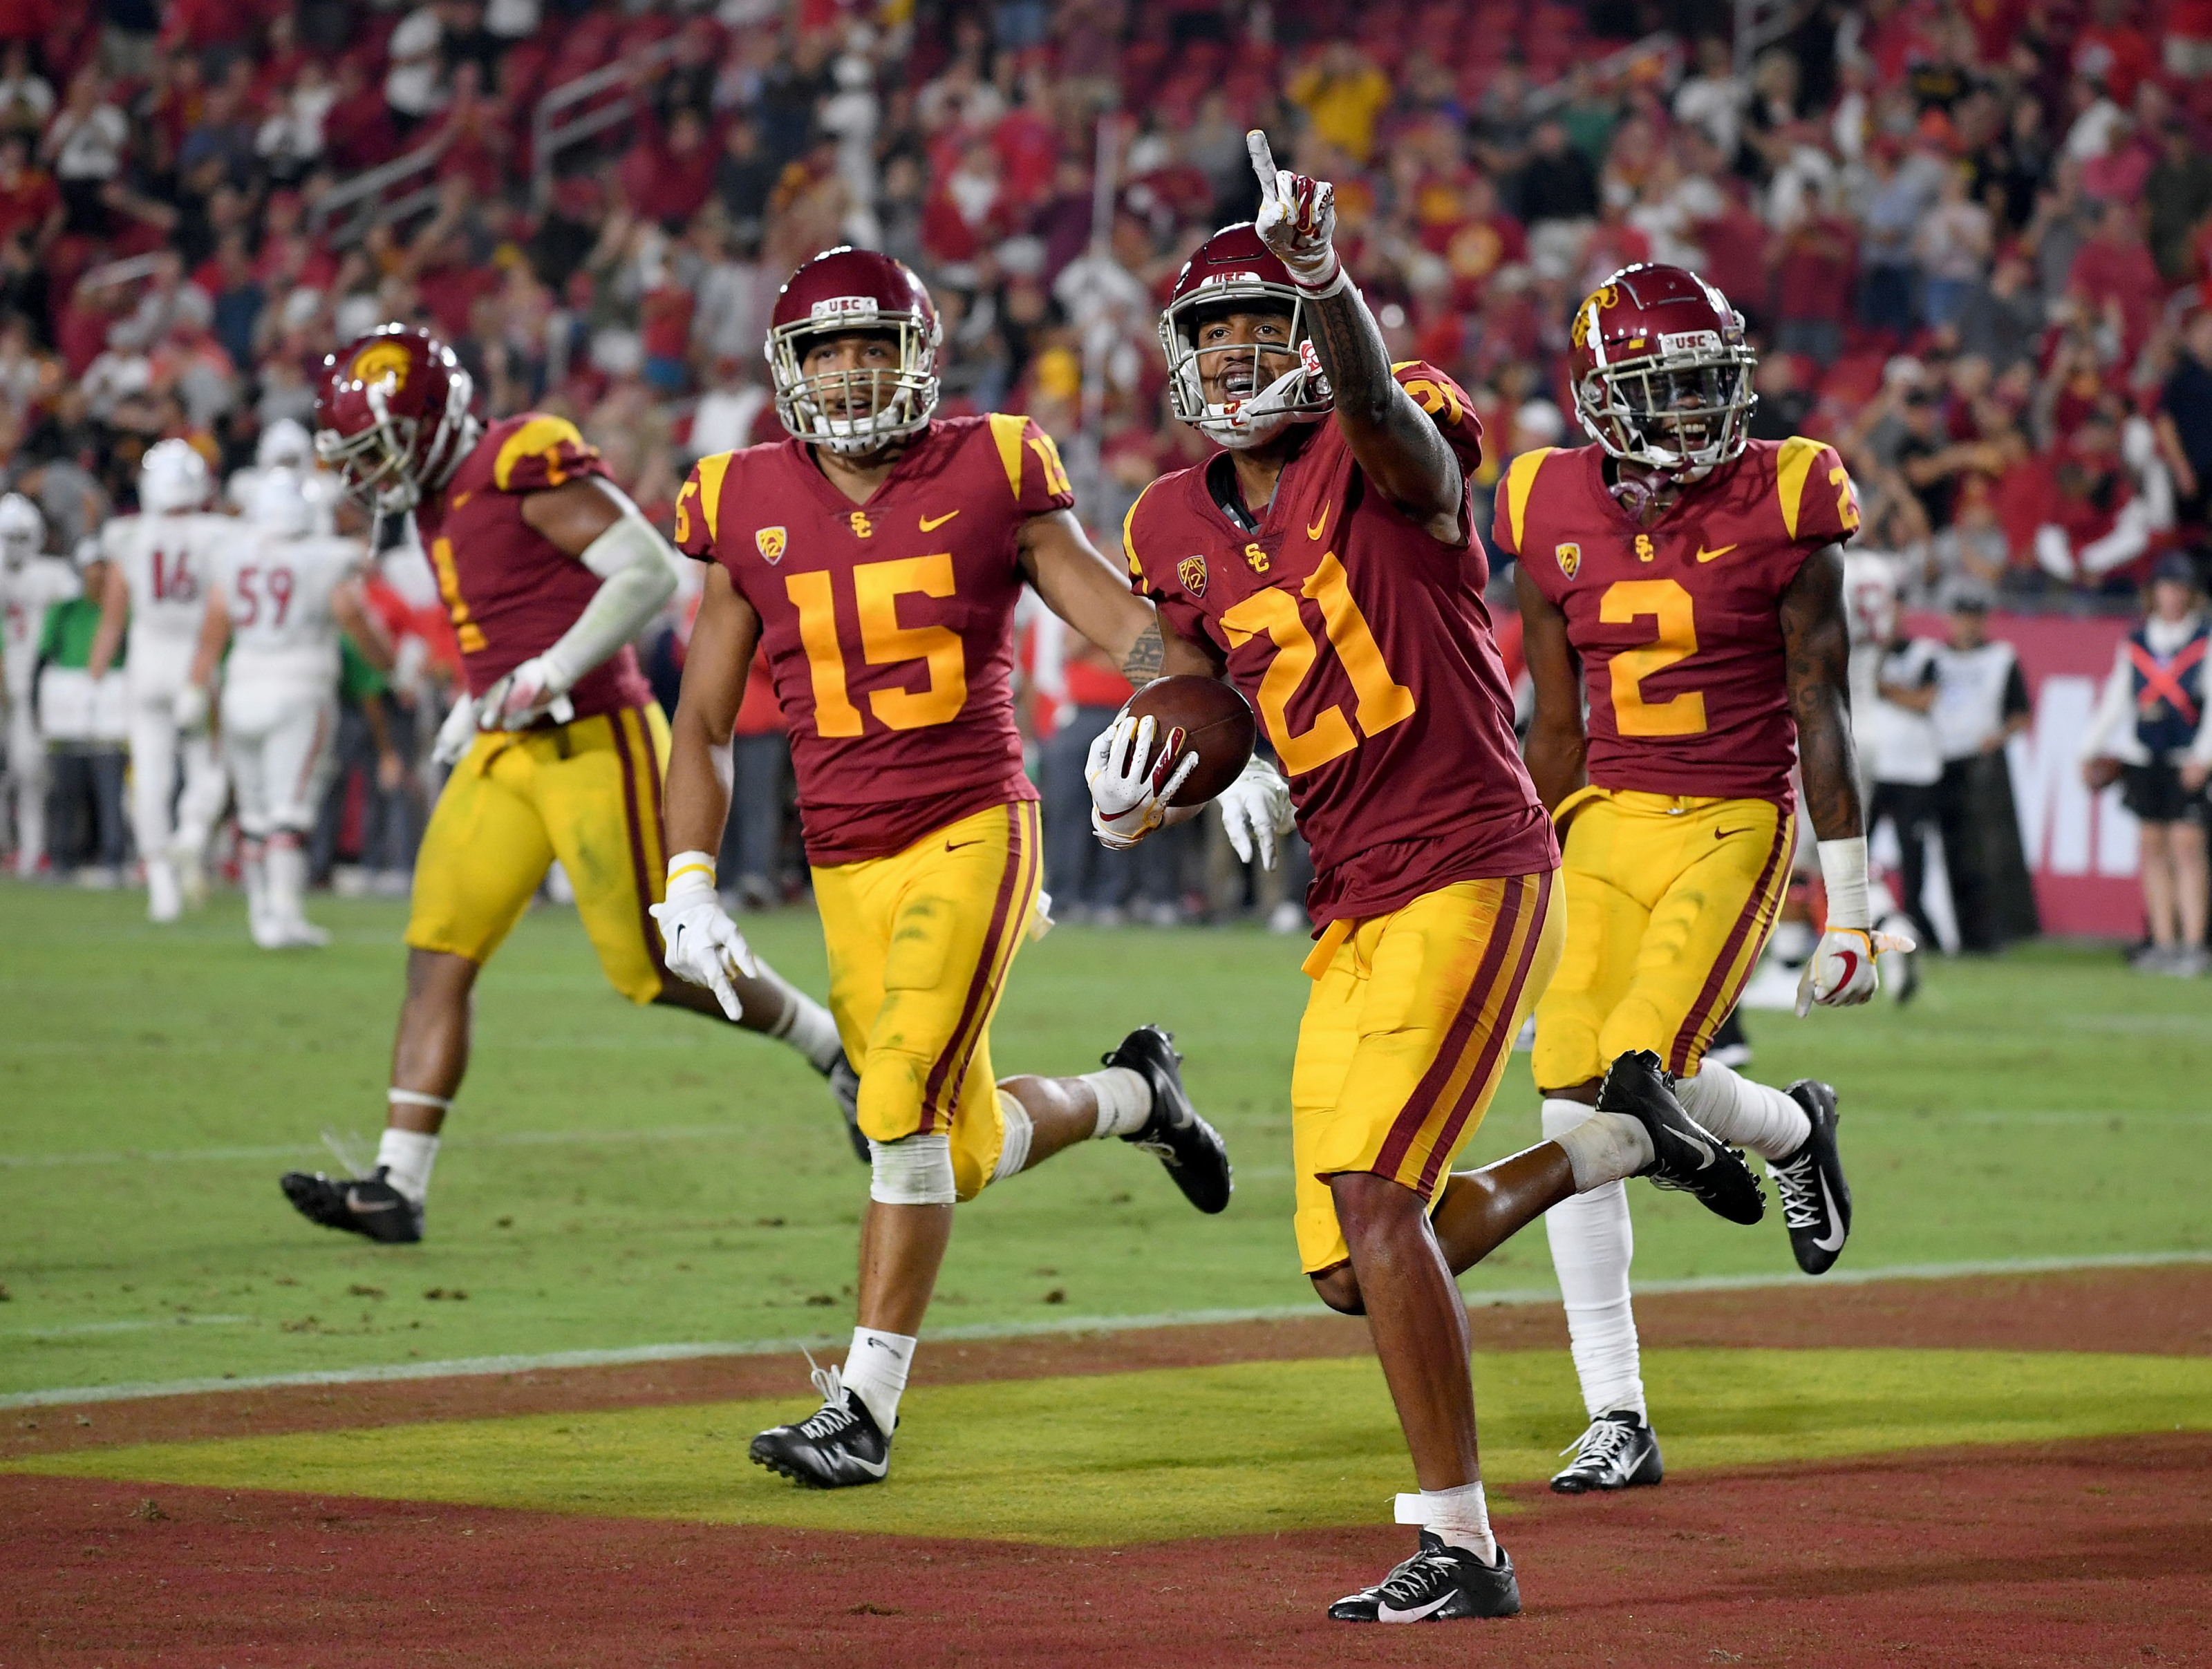 USC Football: 3 reasons Trojans will win the Pac-12 title in 2020 - Page 3